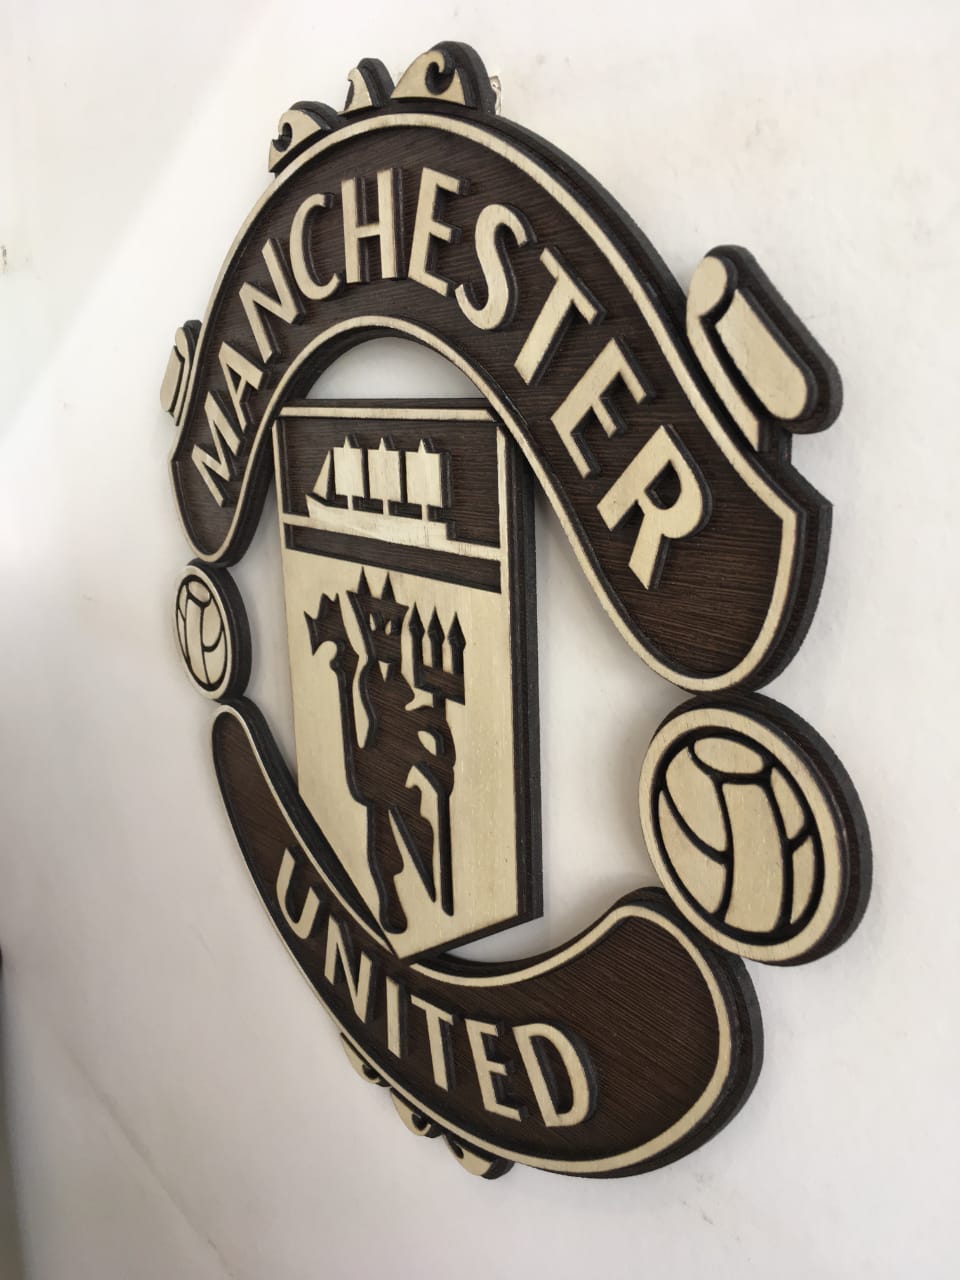 Manchester United Wooden Crest Wall Hanging – TheSportStuff